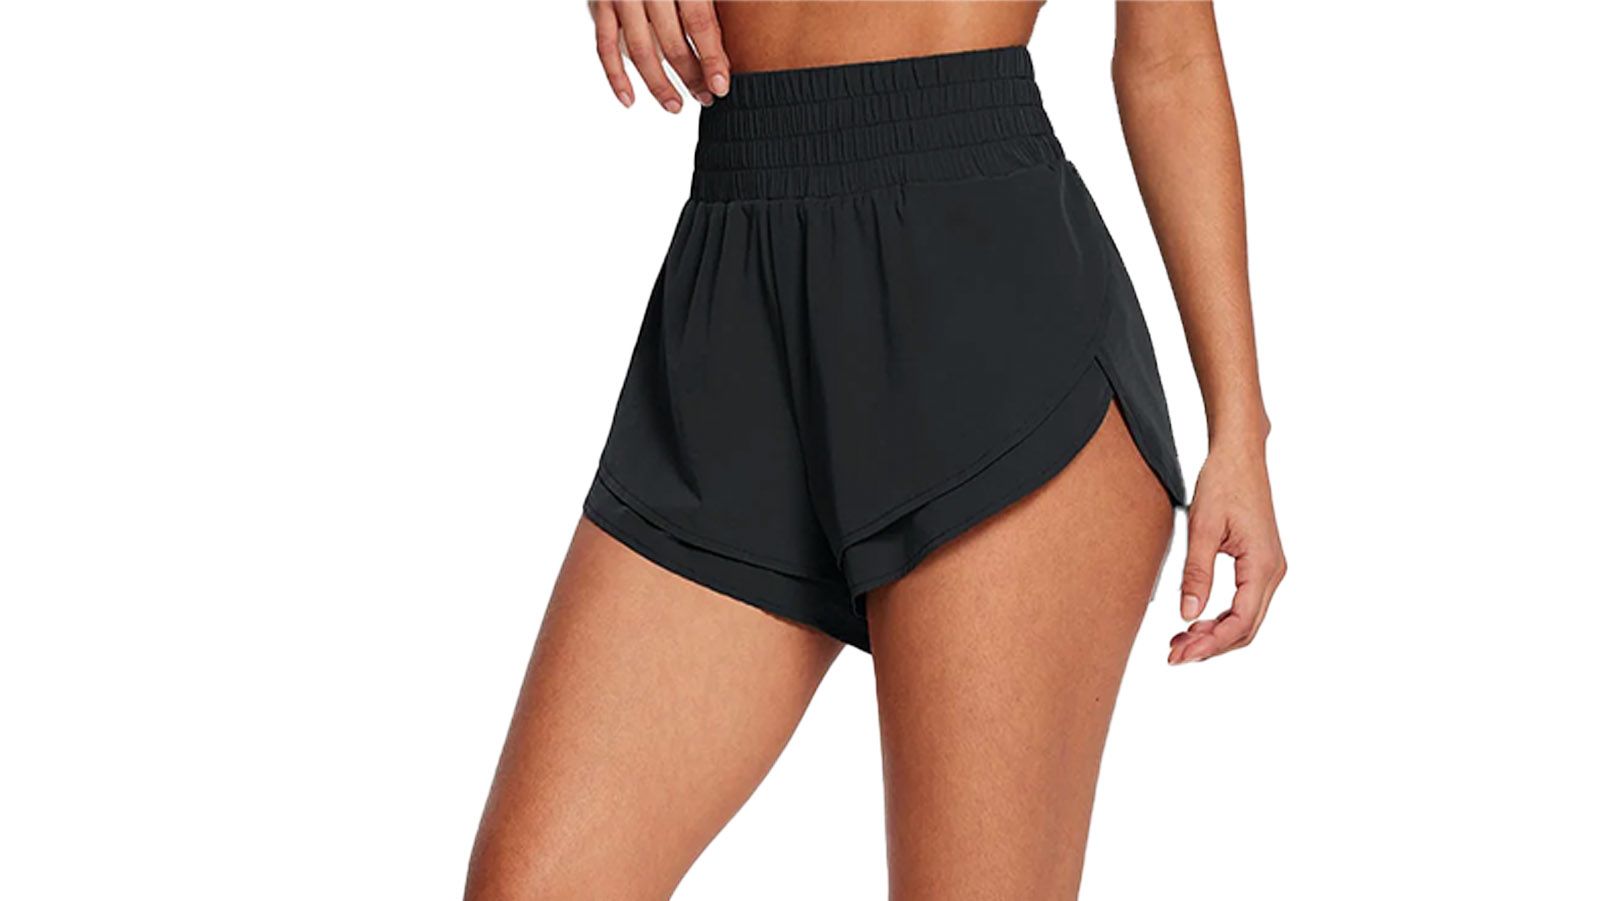 Super Comfortable And Ethical Women's Running Shorts, Clothing and Runners  Gear For 2022